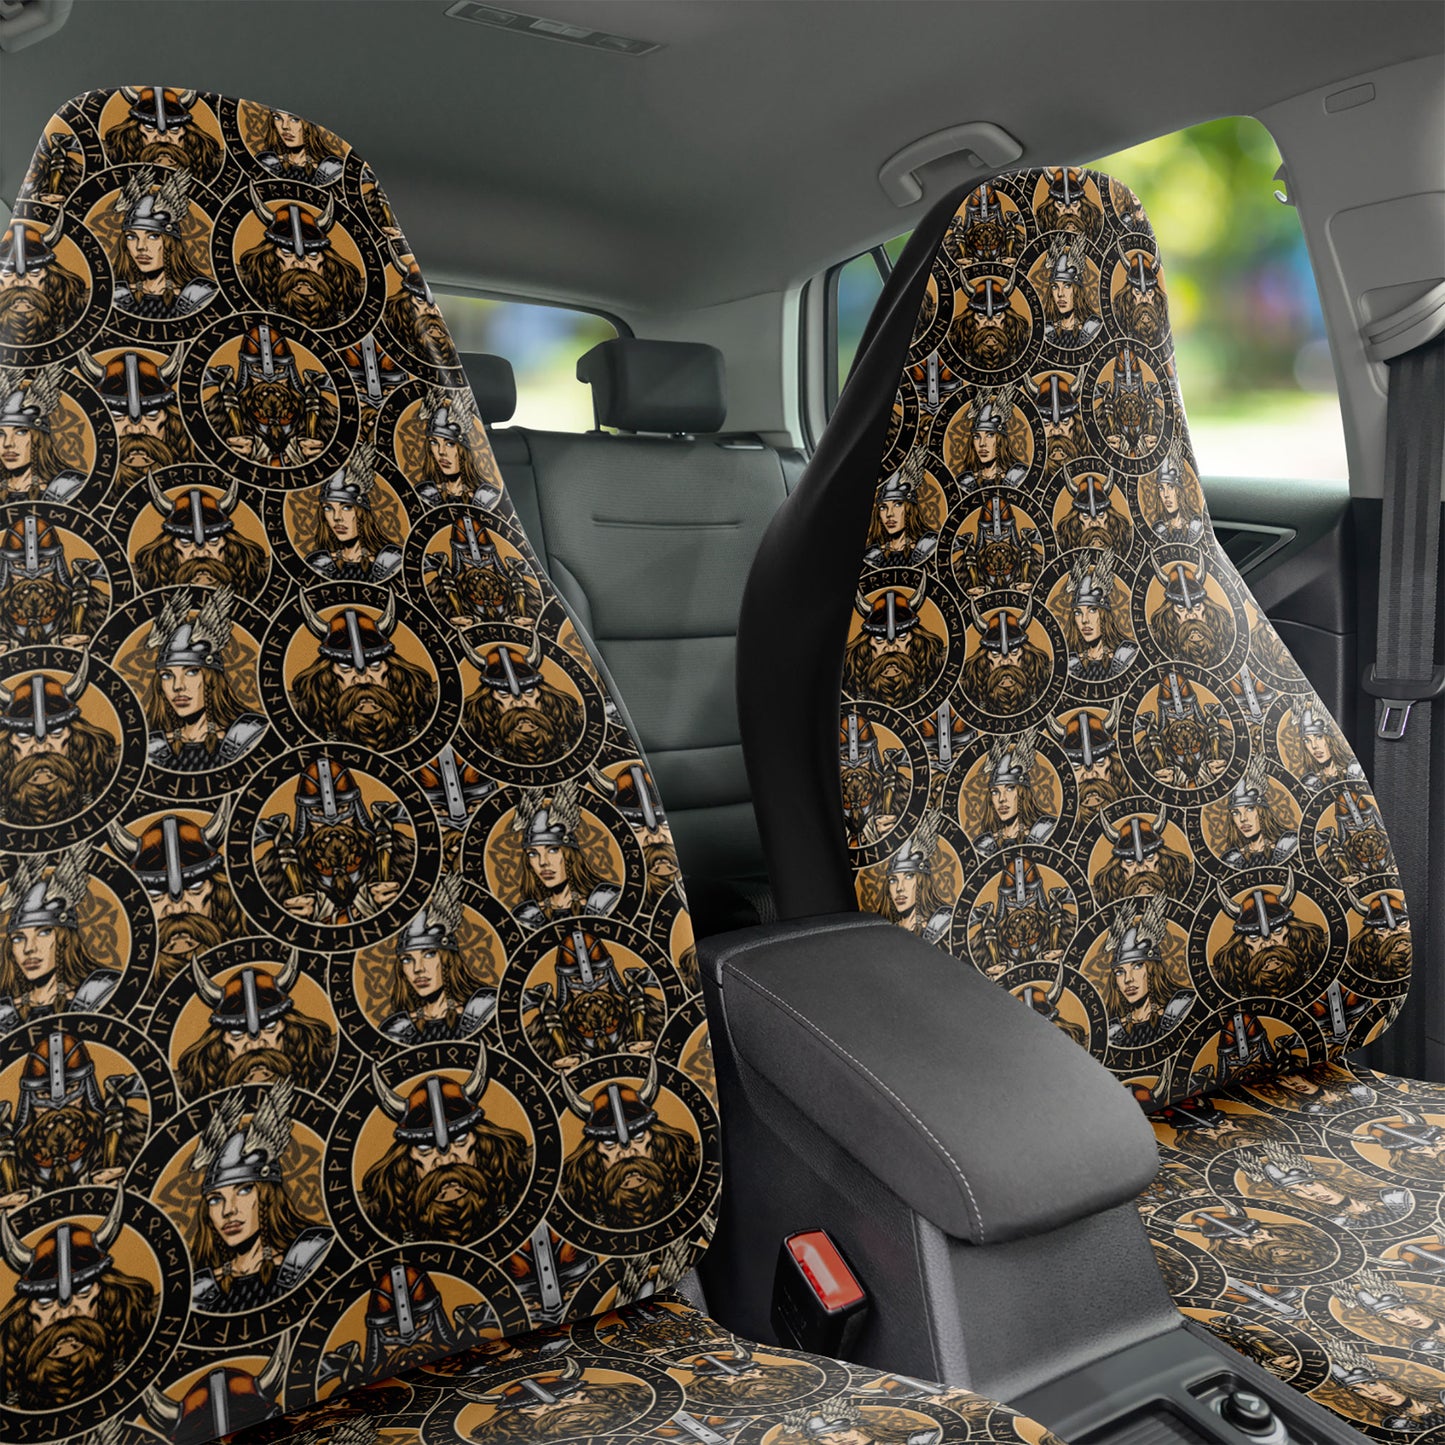 Vintage Viking and Valkyrie car seat covers